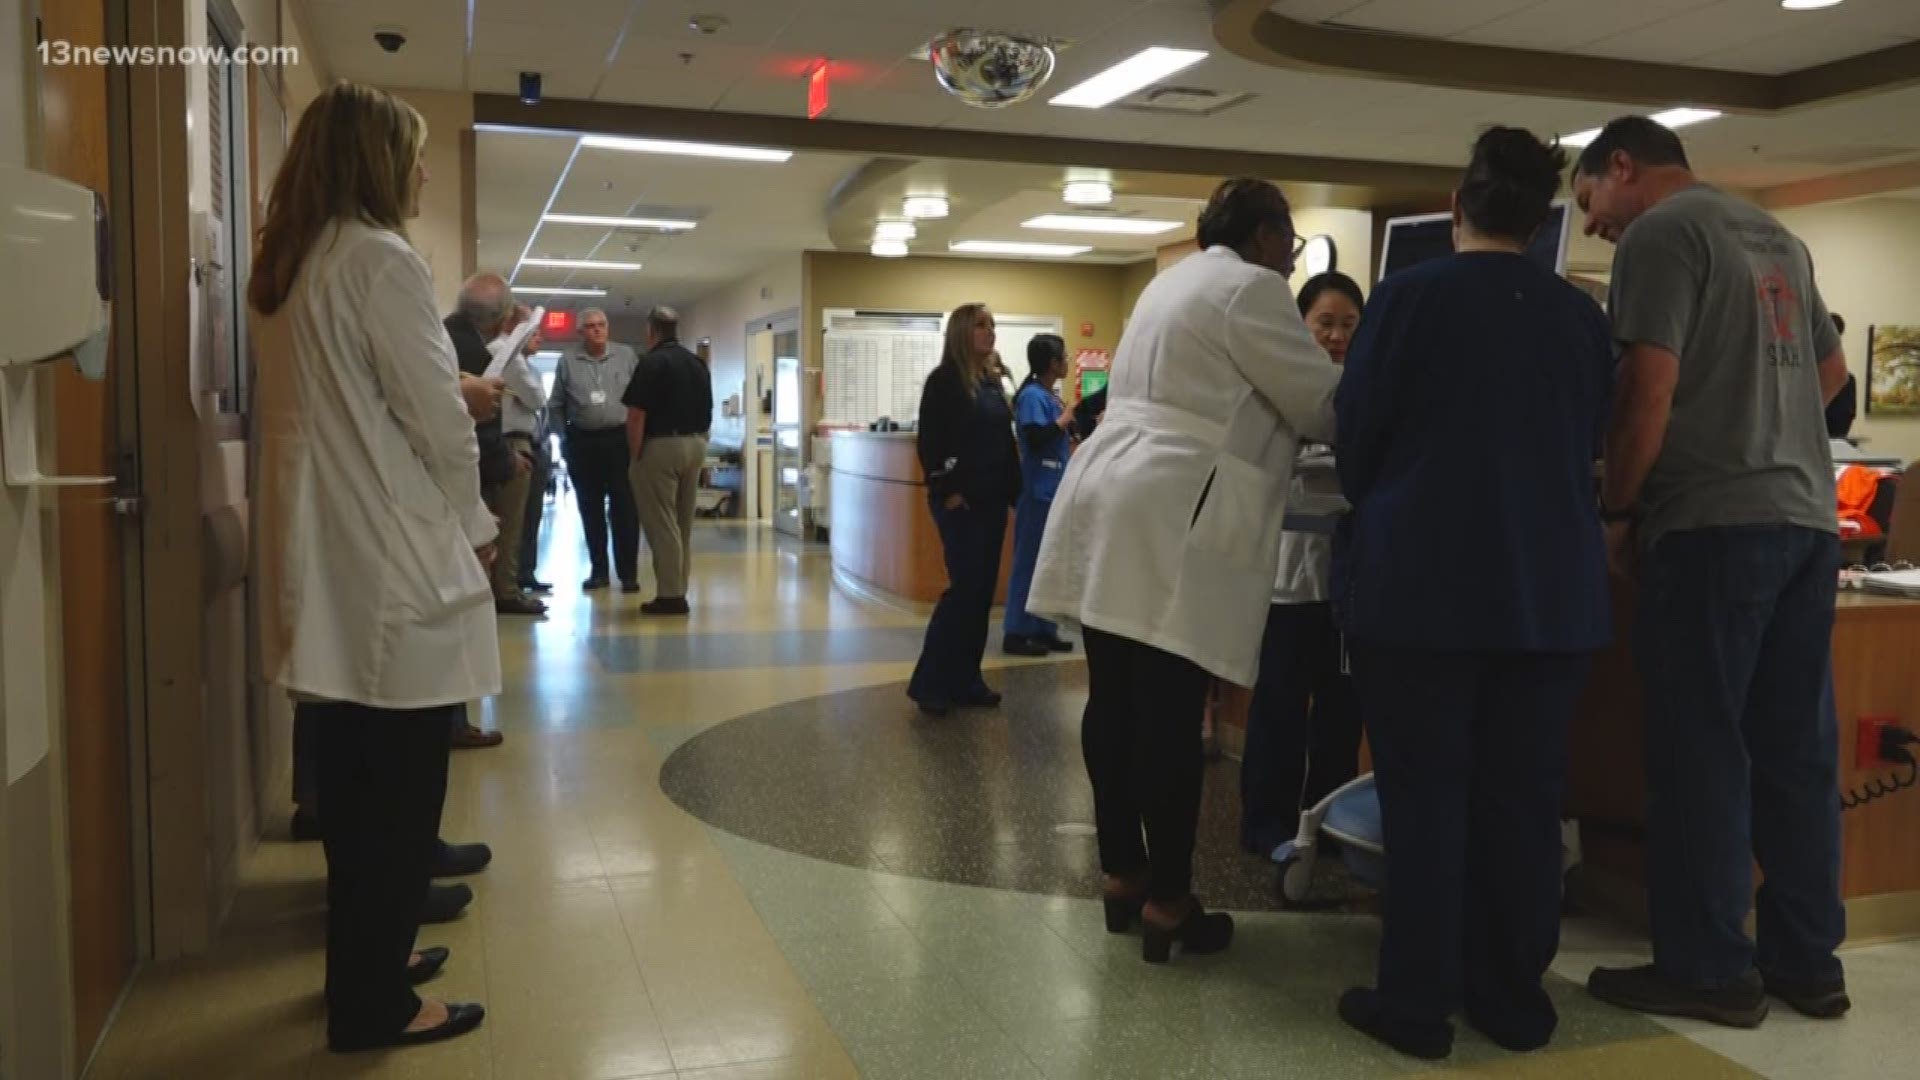 Sentara Princess Anne hospital had a mass casualty drill ahead of the Something in the Water Festival to prepare for the worst.